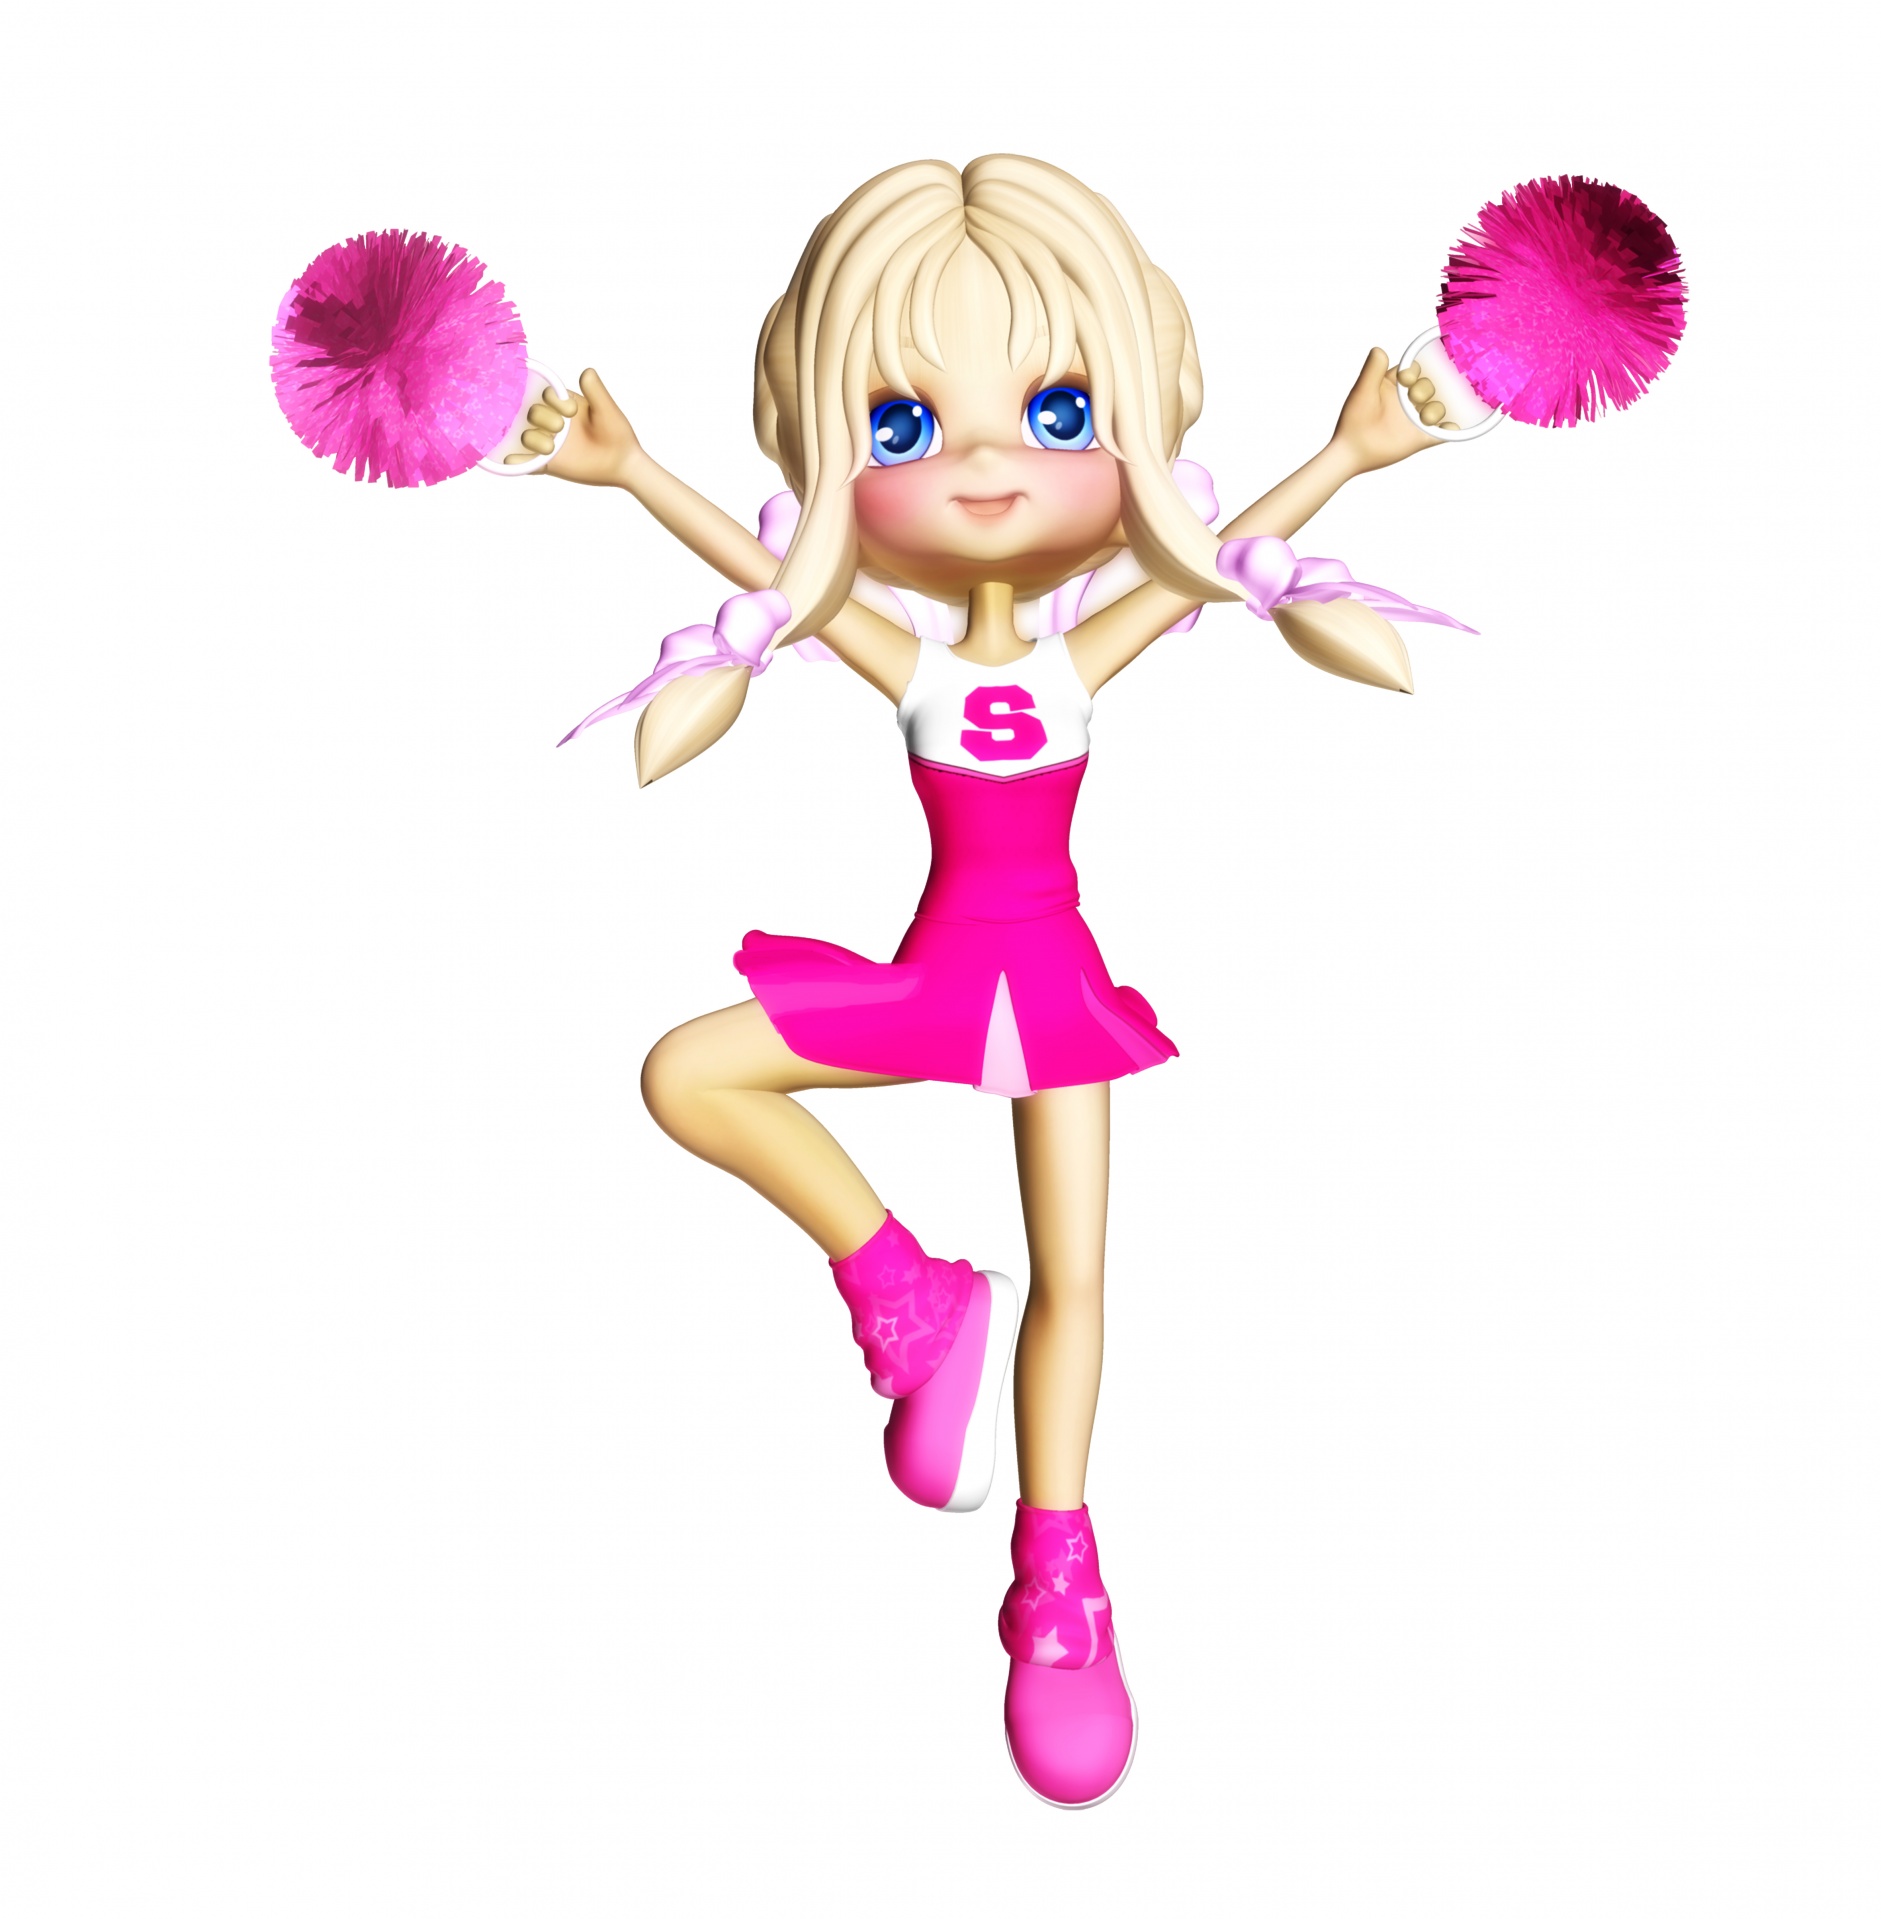 Cheerleader Cartoon Poser Clipart Free Stock Photo - Public Domain Pictures